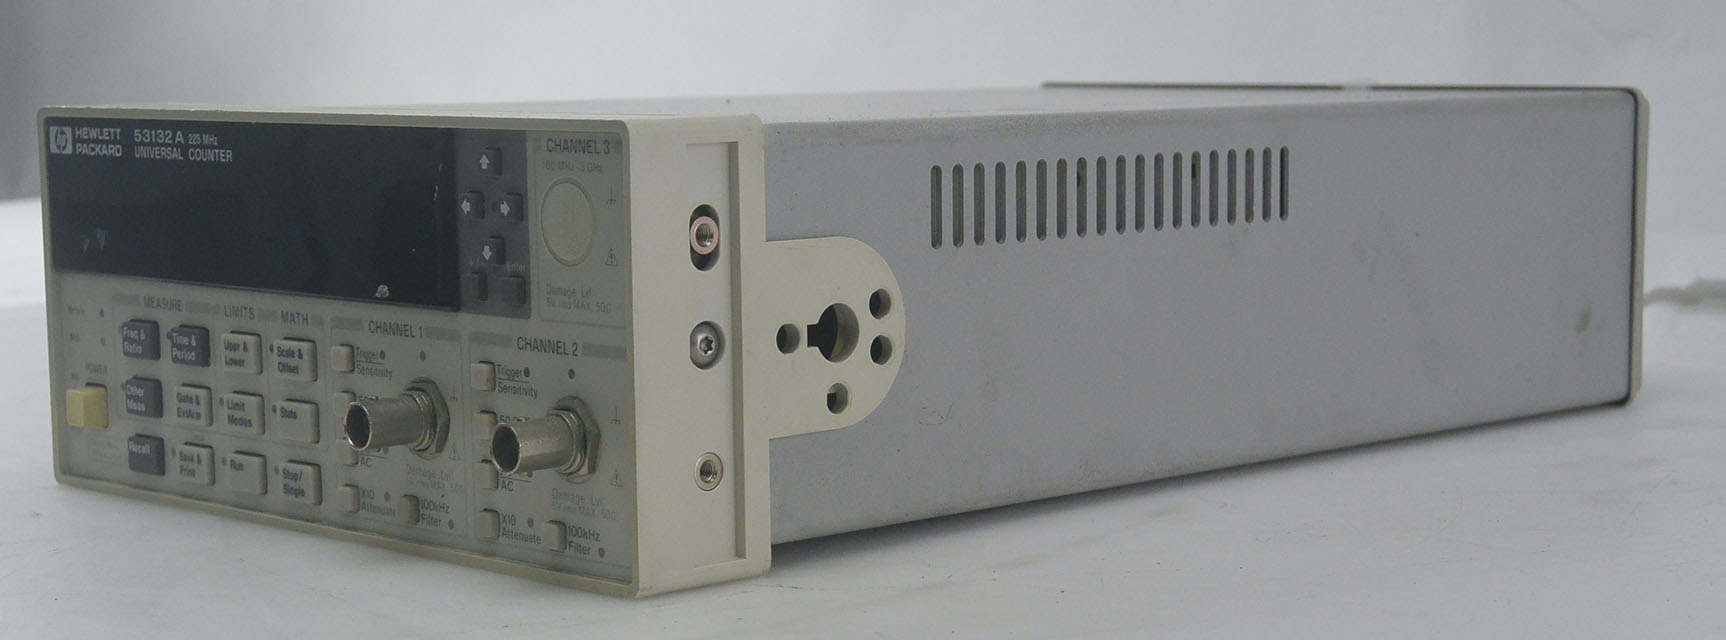 Keysight(Agilent) 53132A Universal Frequency Counter